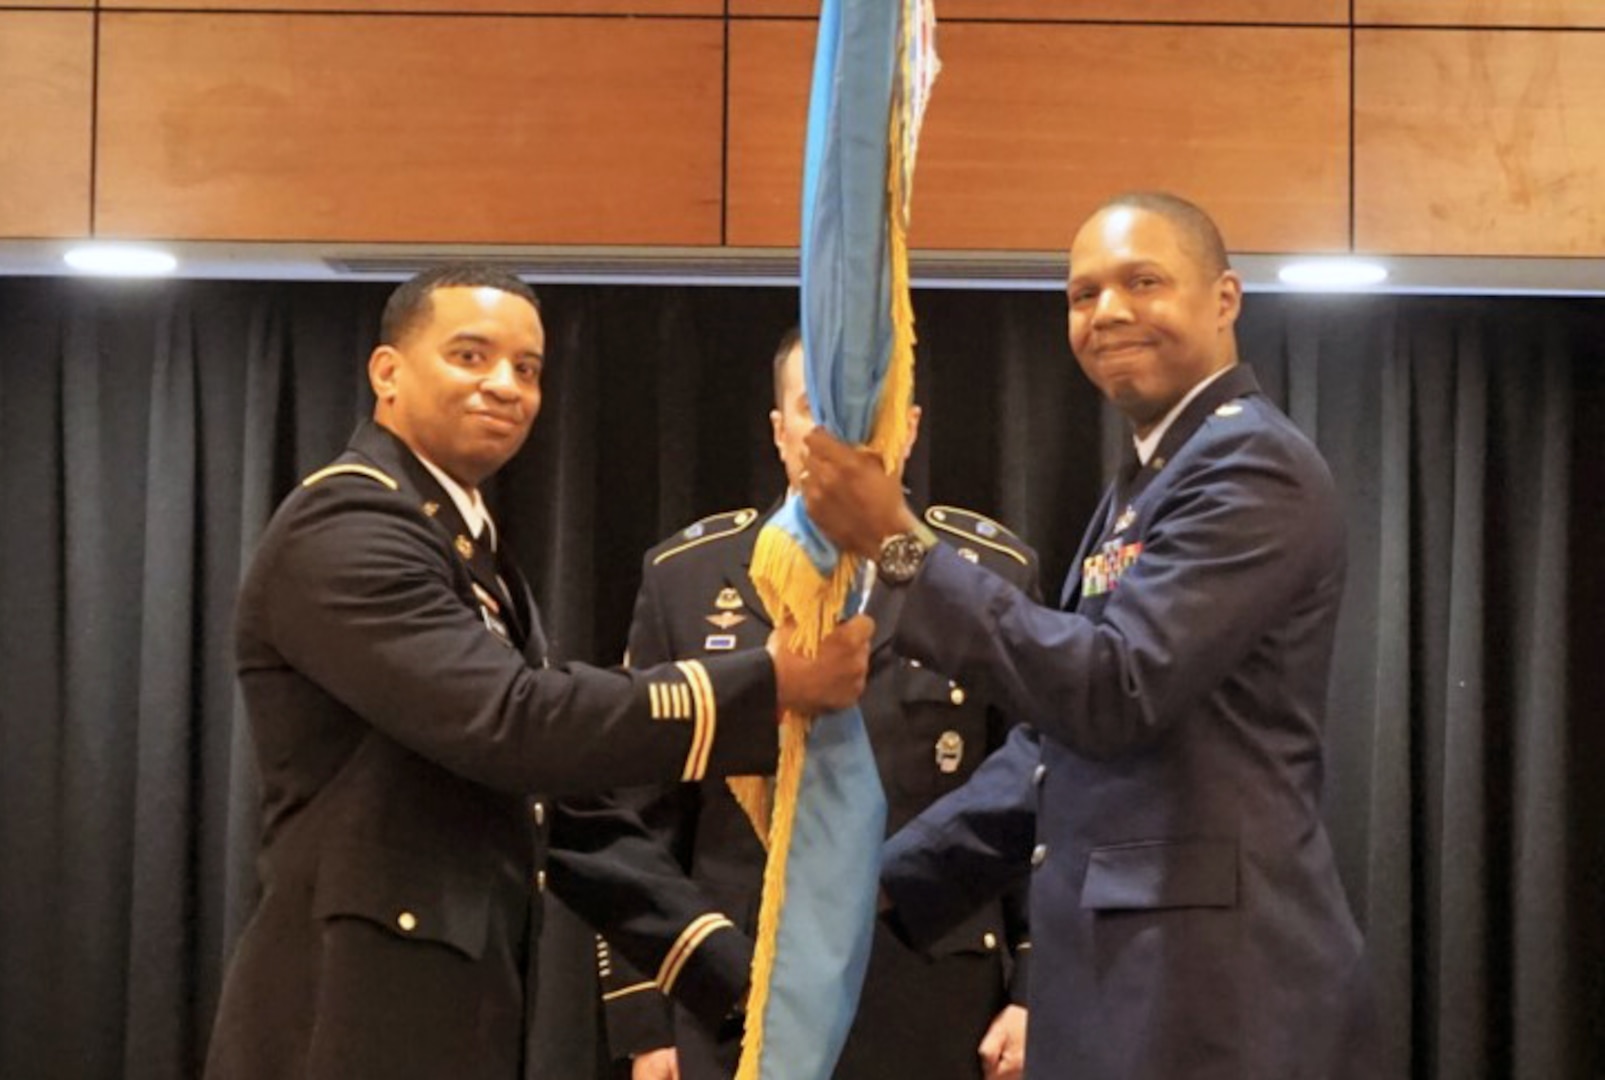 DLA Energy Americas Commander Army Col. Kevin Cotman presented the DLA flag to Air Force Maj. Marcus McWilliams